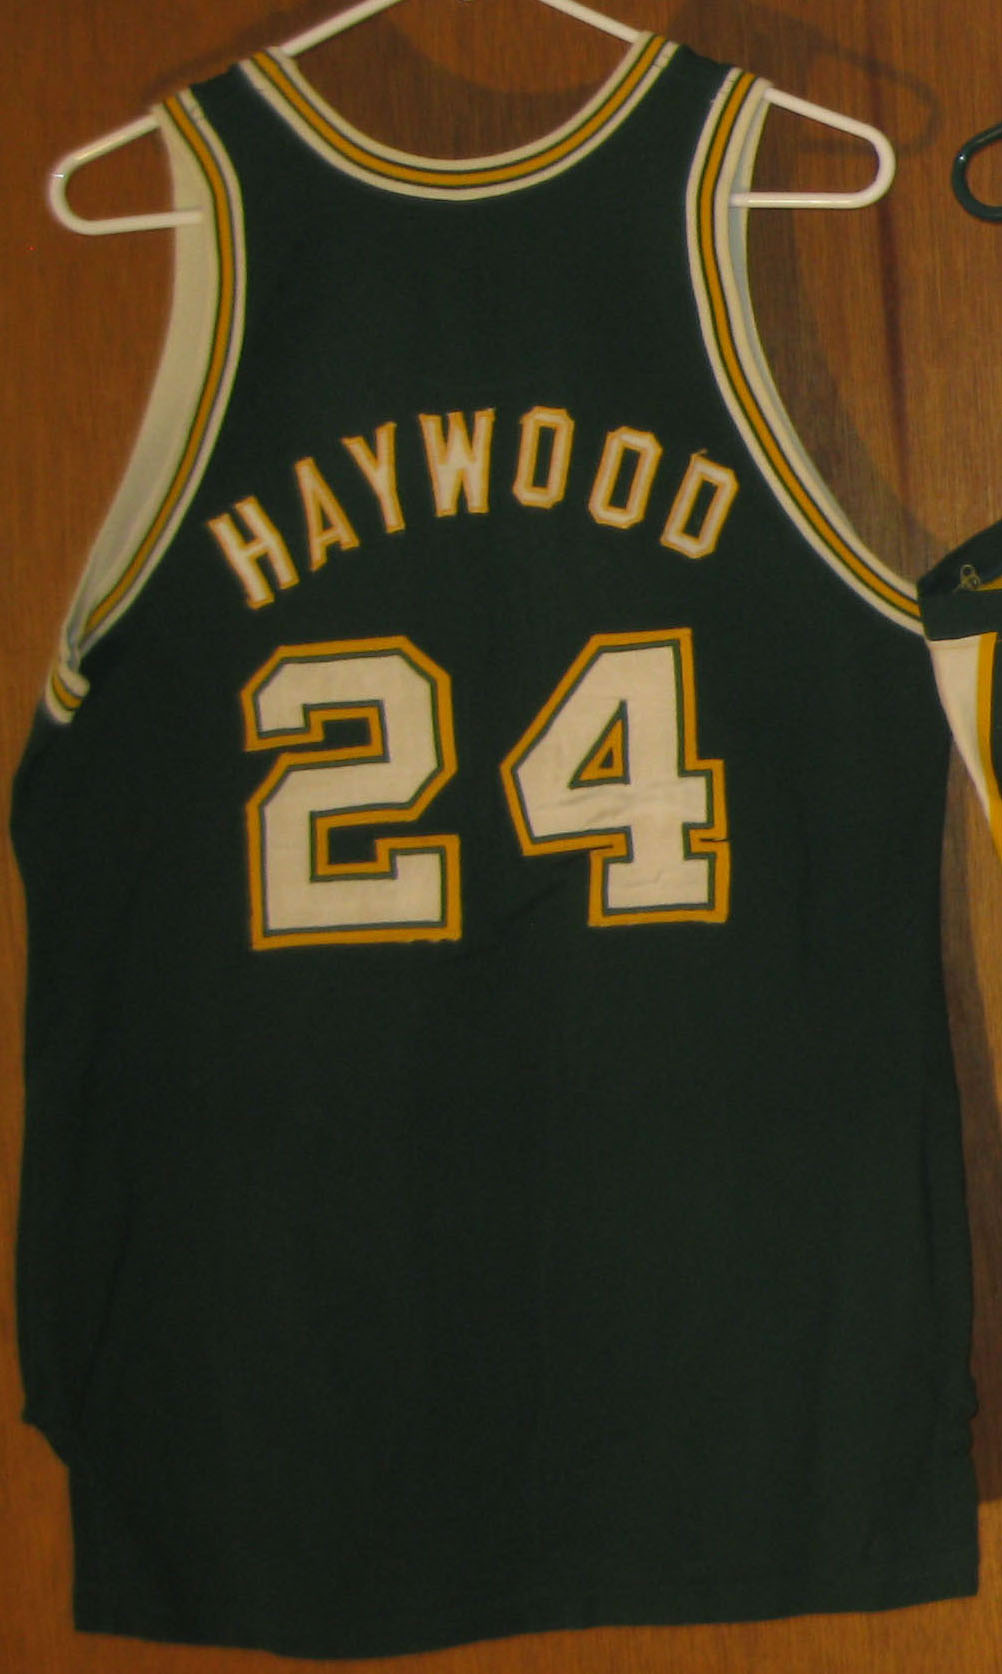 Spencer Haywood of the Seattle SuperSonics retired jersey hangs in  Nachrichtenfoto - Getty Images